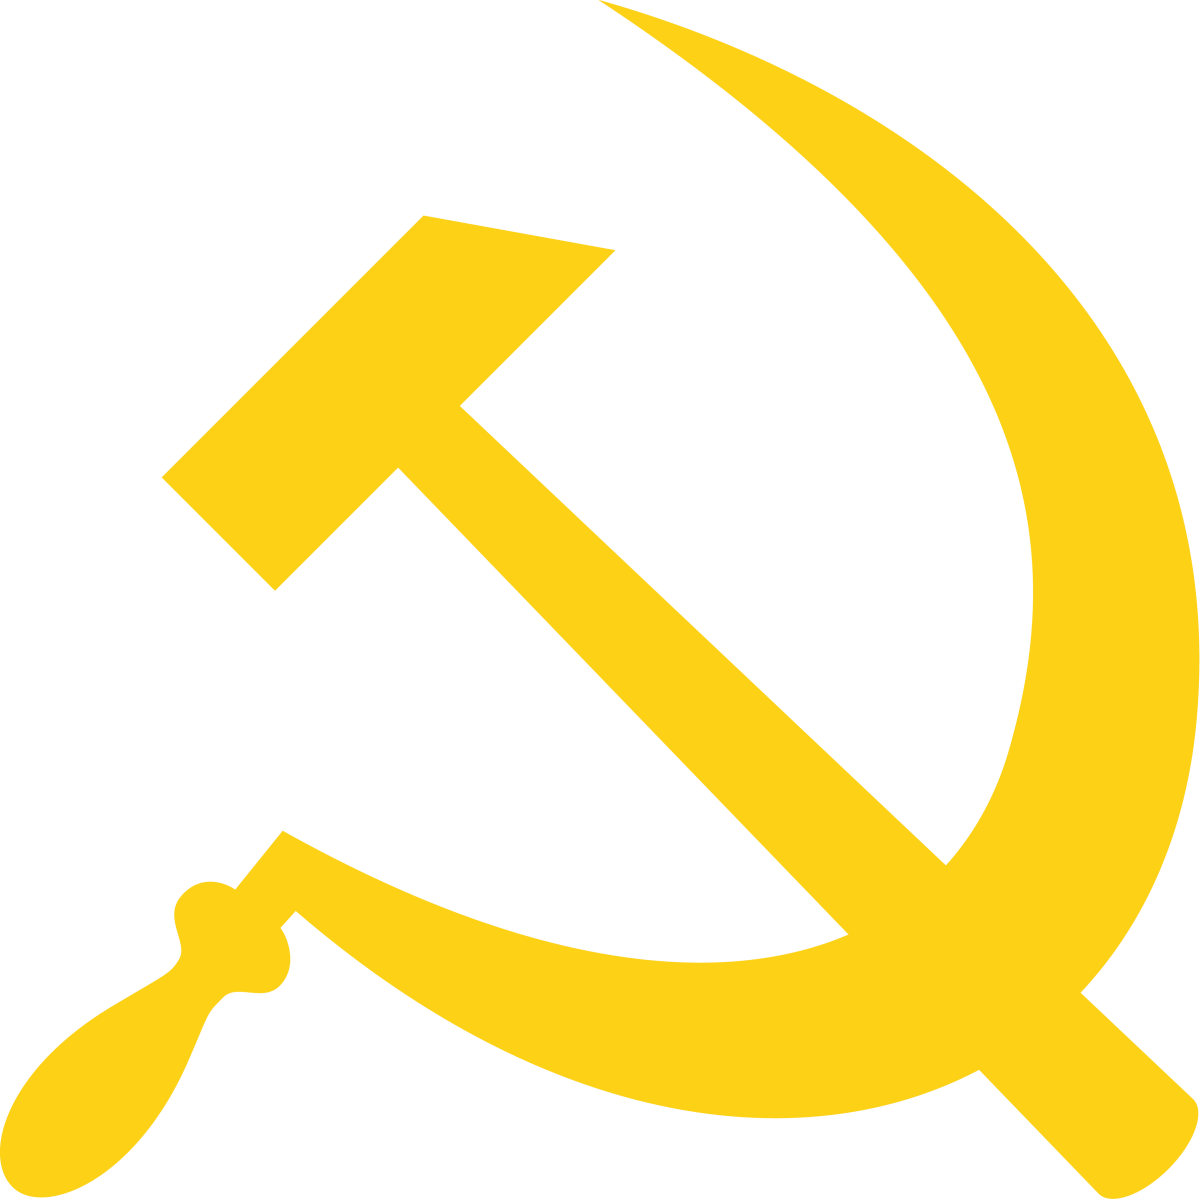 Soviet Hammer And Sickle - Centre Of Indian Trade Unions (3574x3574)